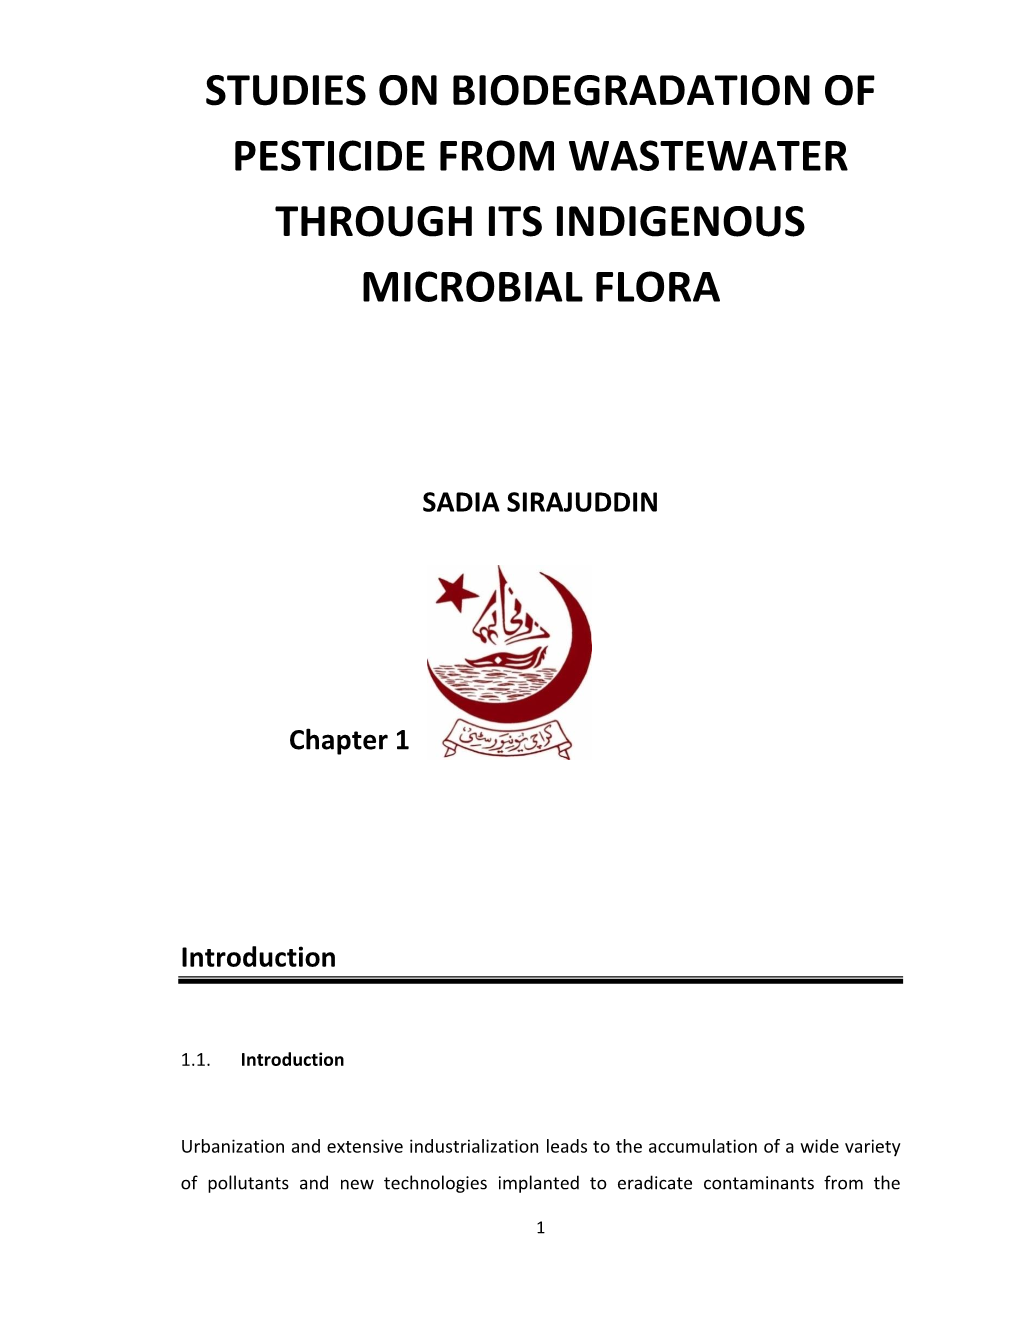 Studies on Biodegradation of Pesticide from Wastewater Through Its Indigenous Microbial Flora